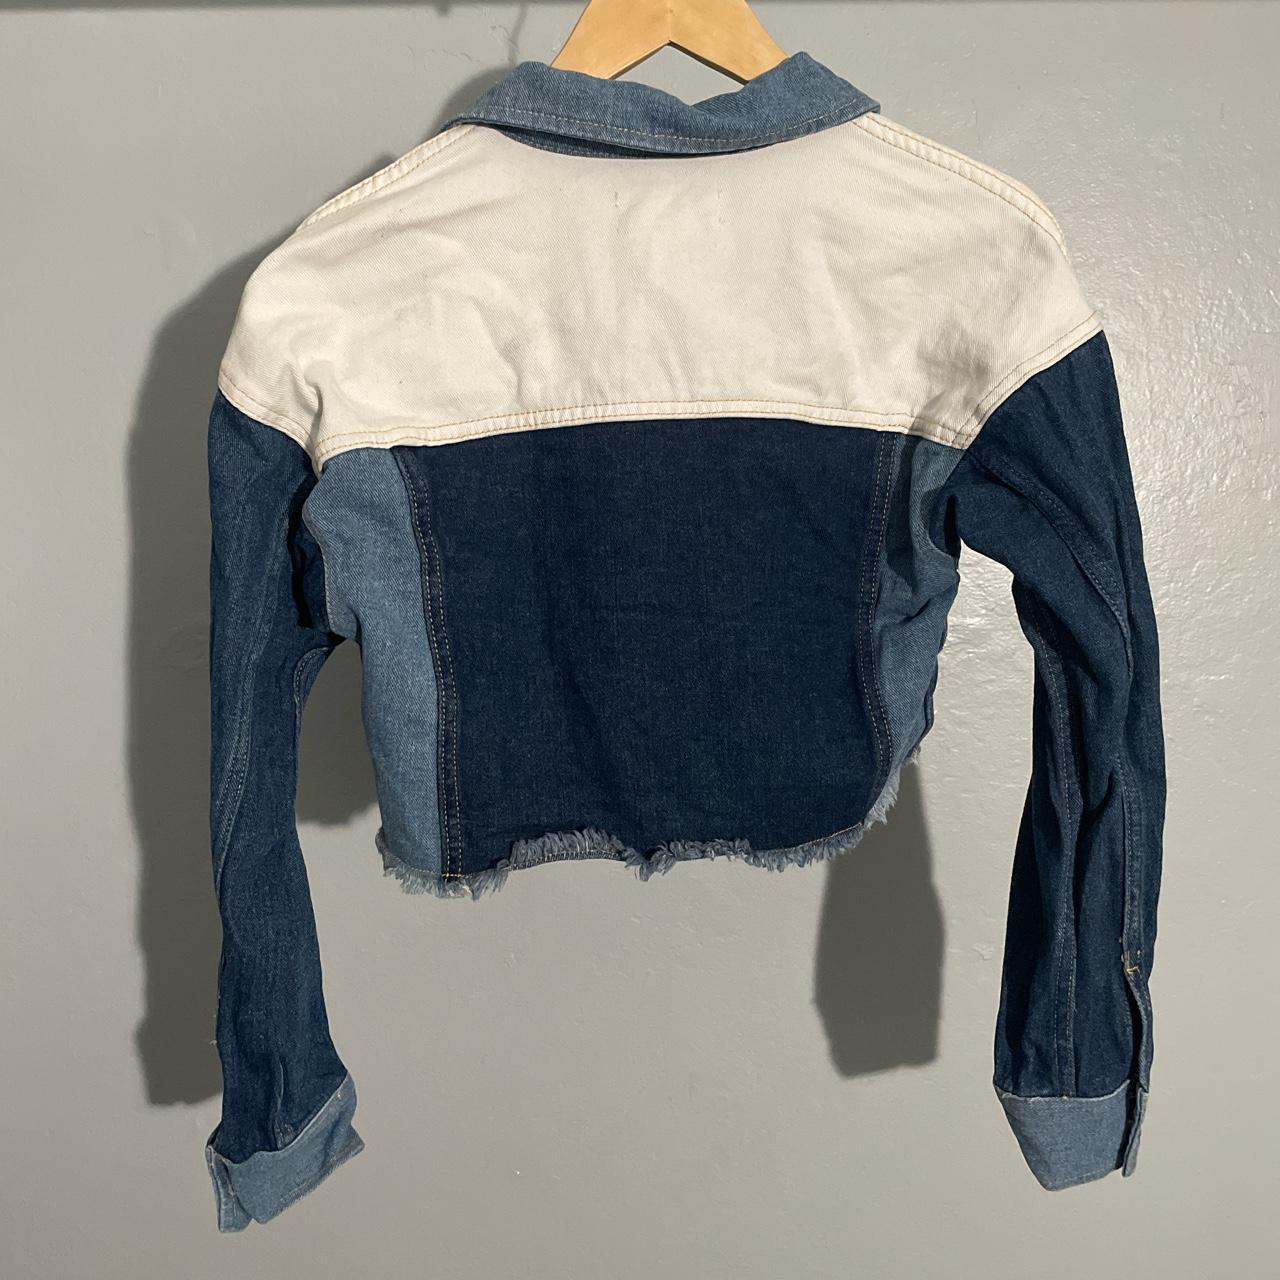 PacSun Women's White and Blue Jacket (2)